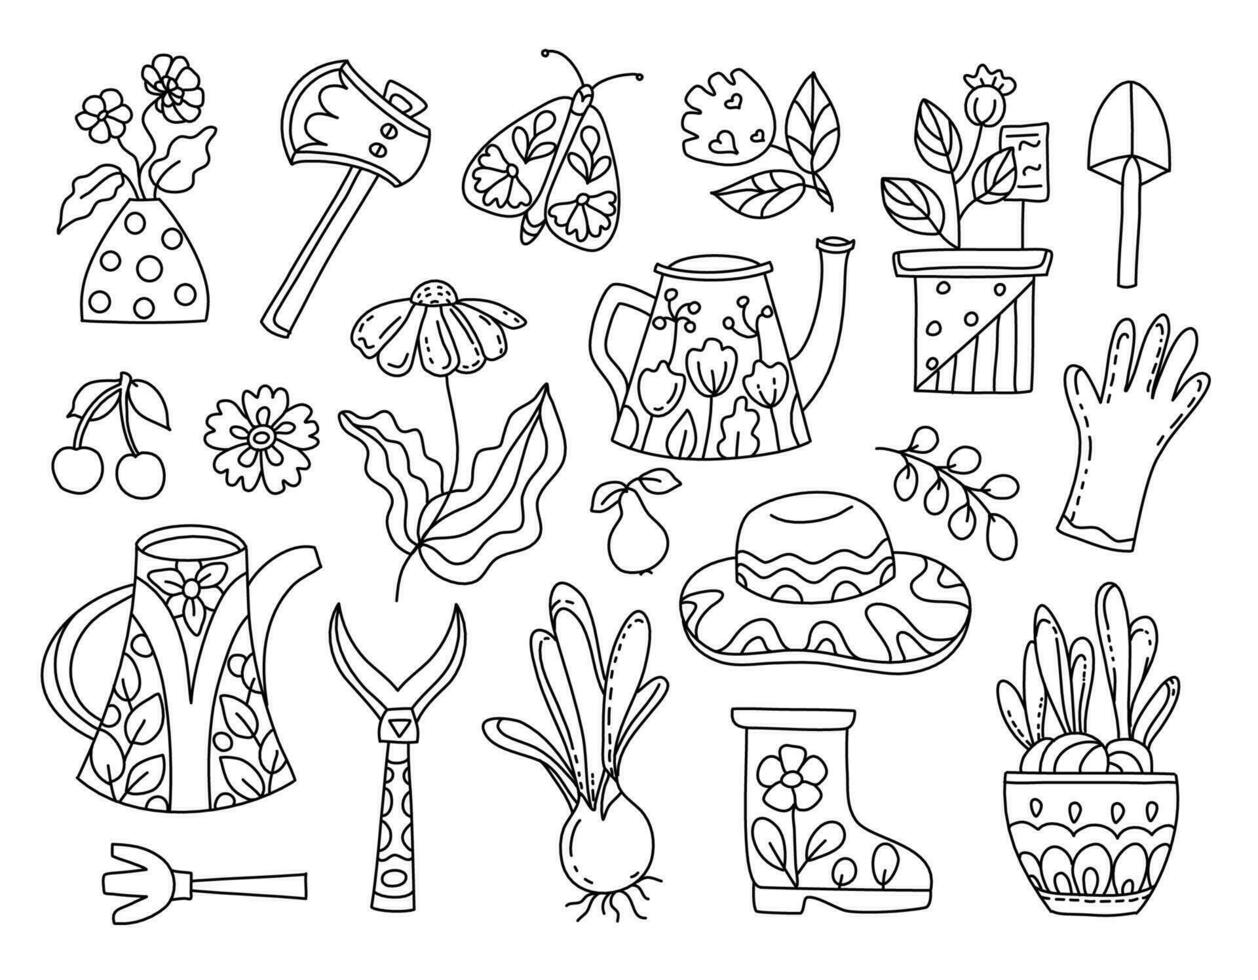 Love our planet, green vibes. Hand drawn coloring page for kids and adults. Garden, farm objects. Beautiful drawing with patterns and small details. Coloring book pictures. Vector